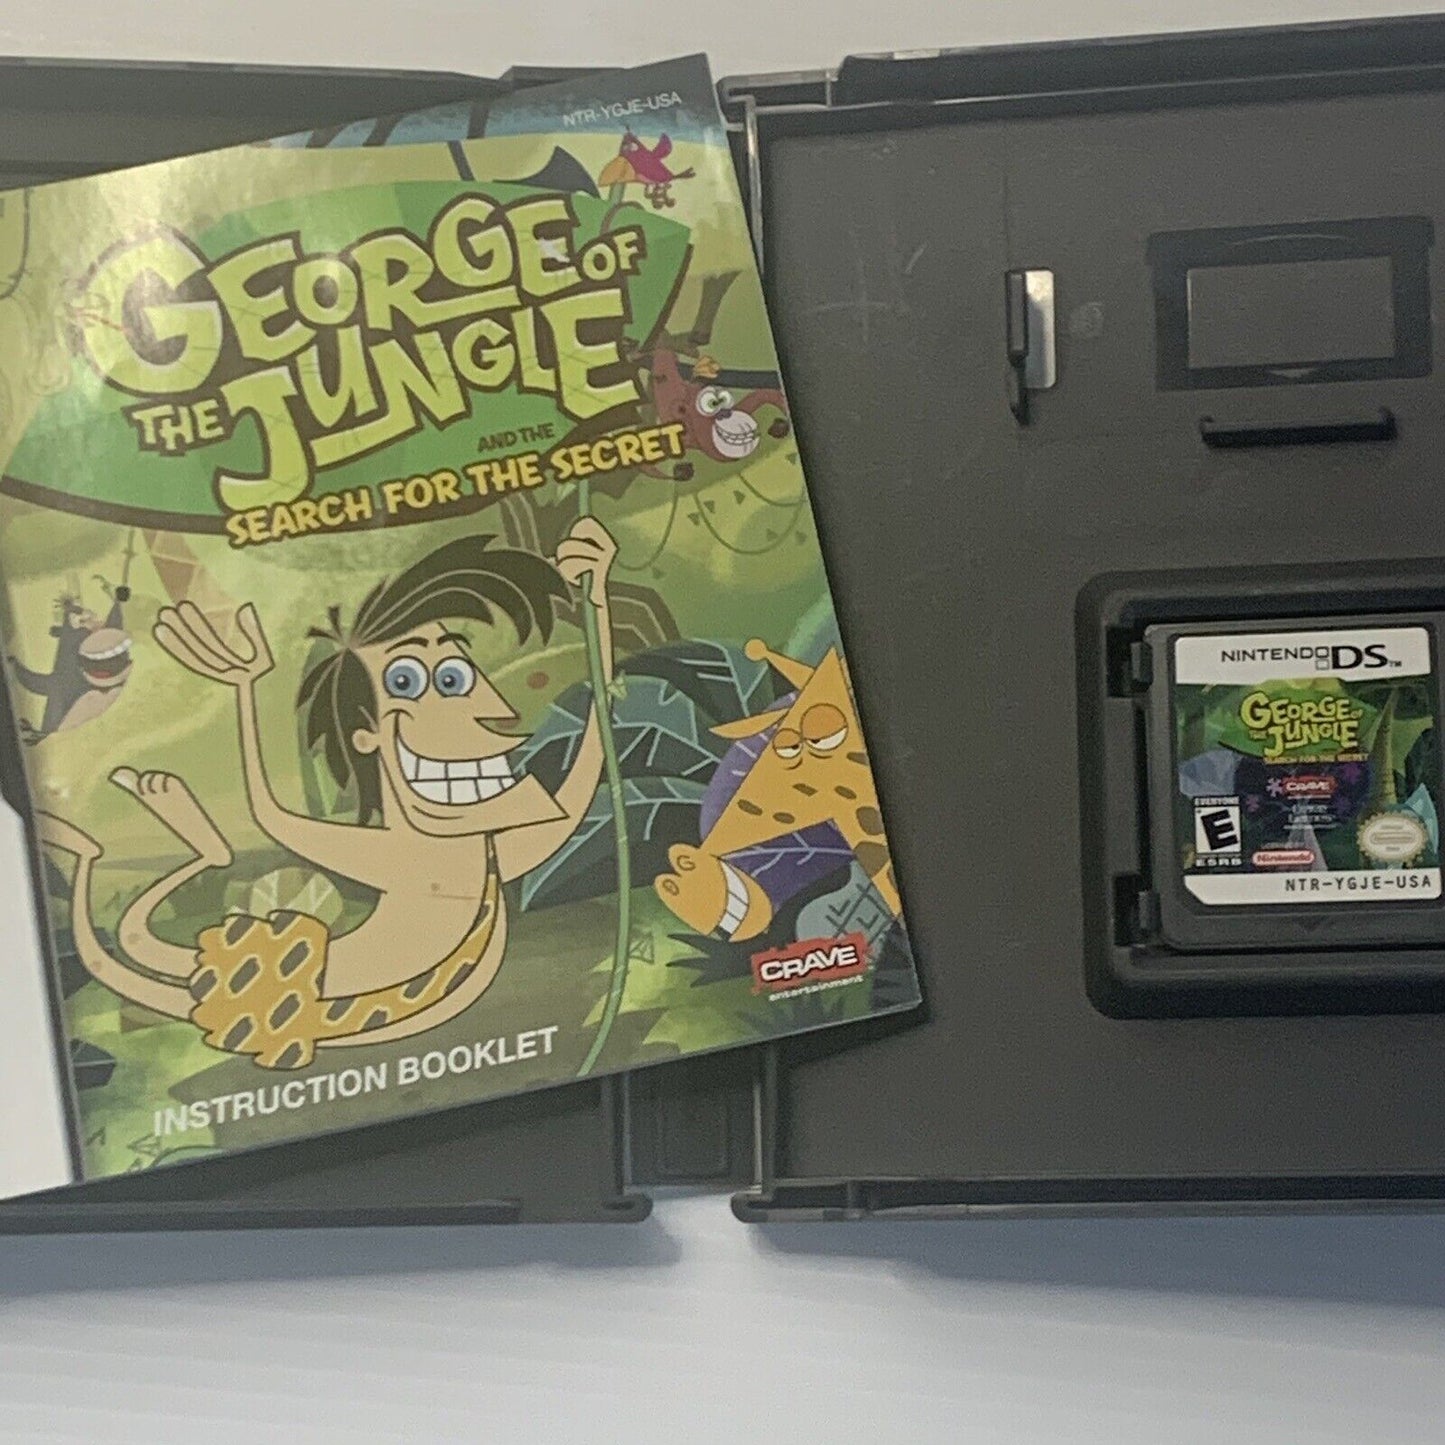 George of the Jungle and the Search for the Secret Nintendo DS Game